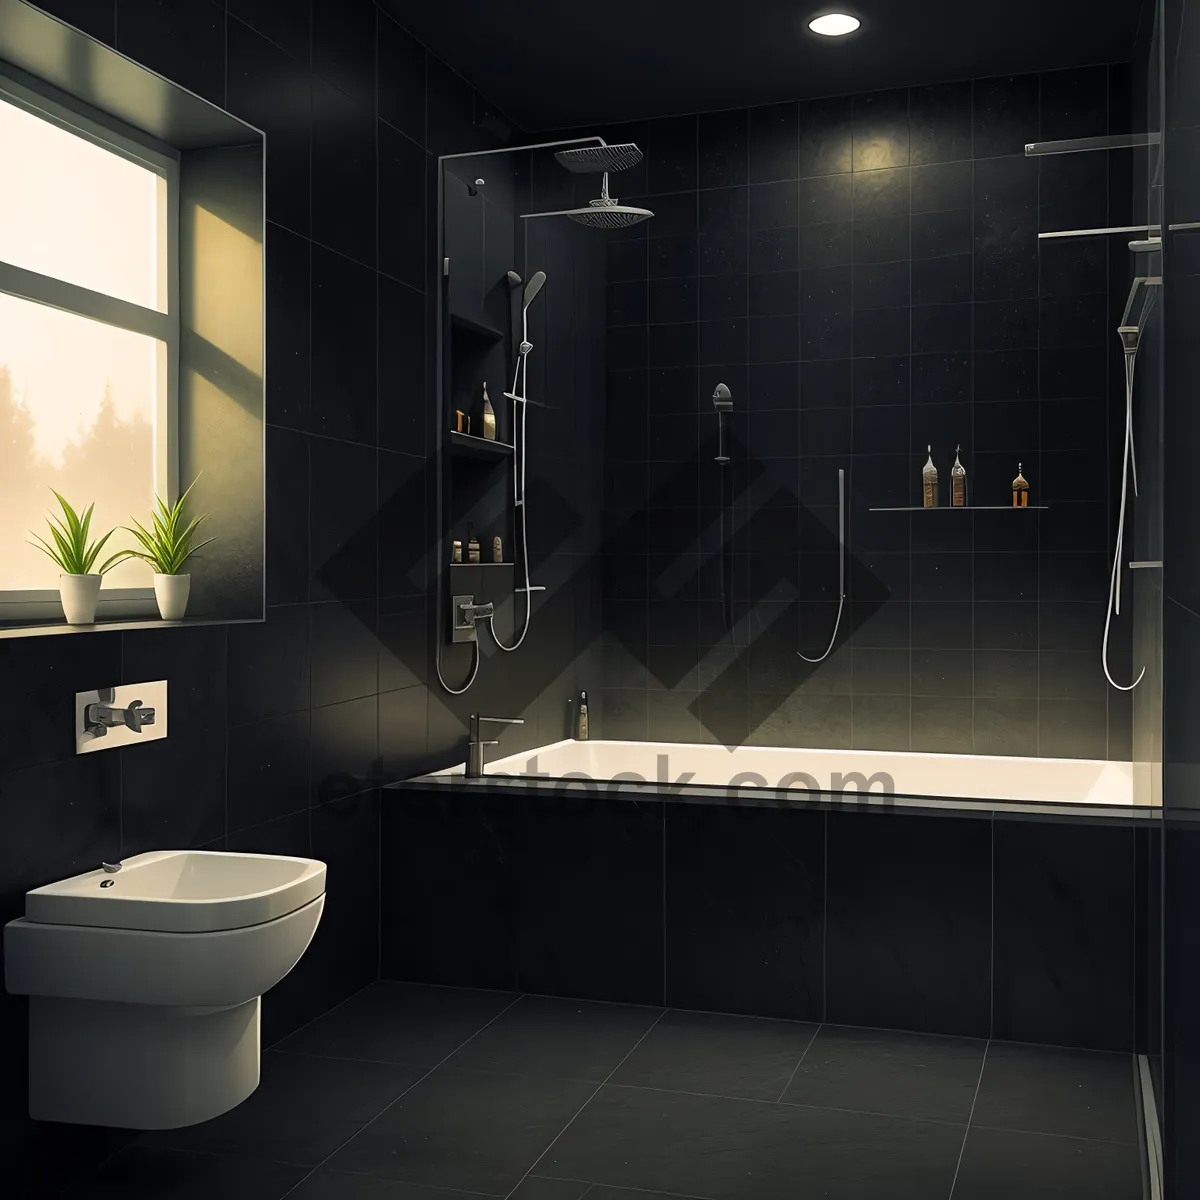 Picture of Modern bathroom interior with sleek furniture and elegant decor.